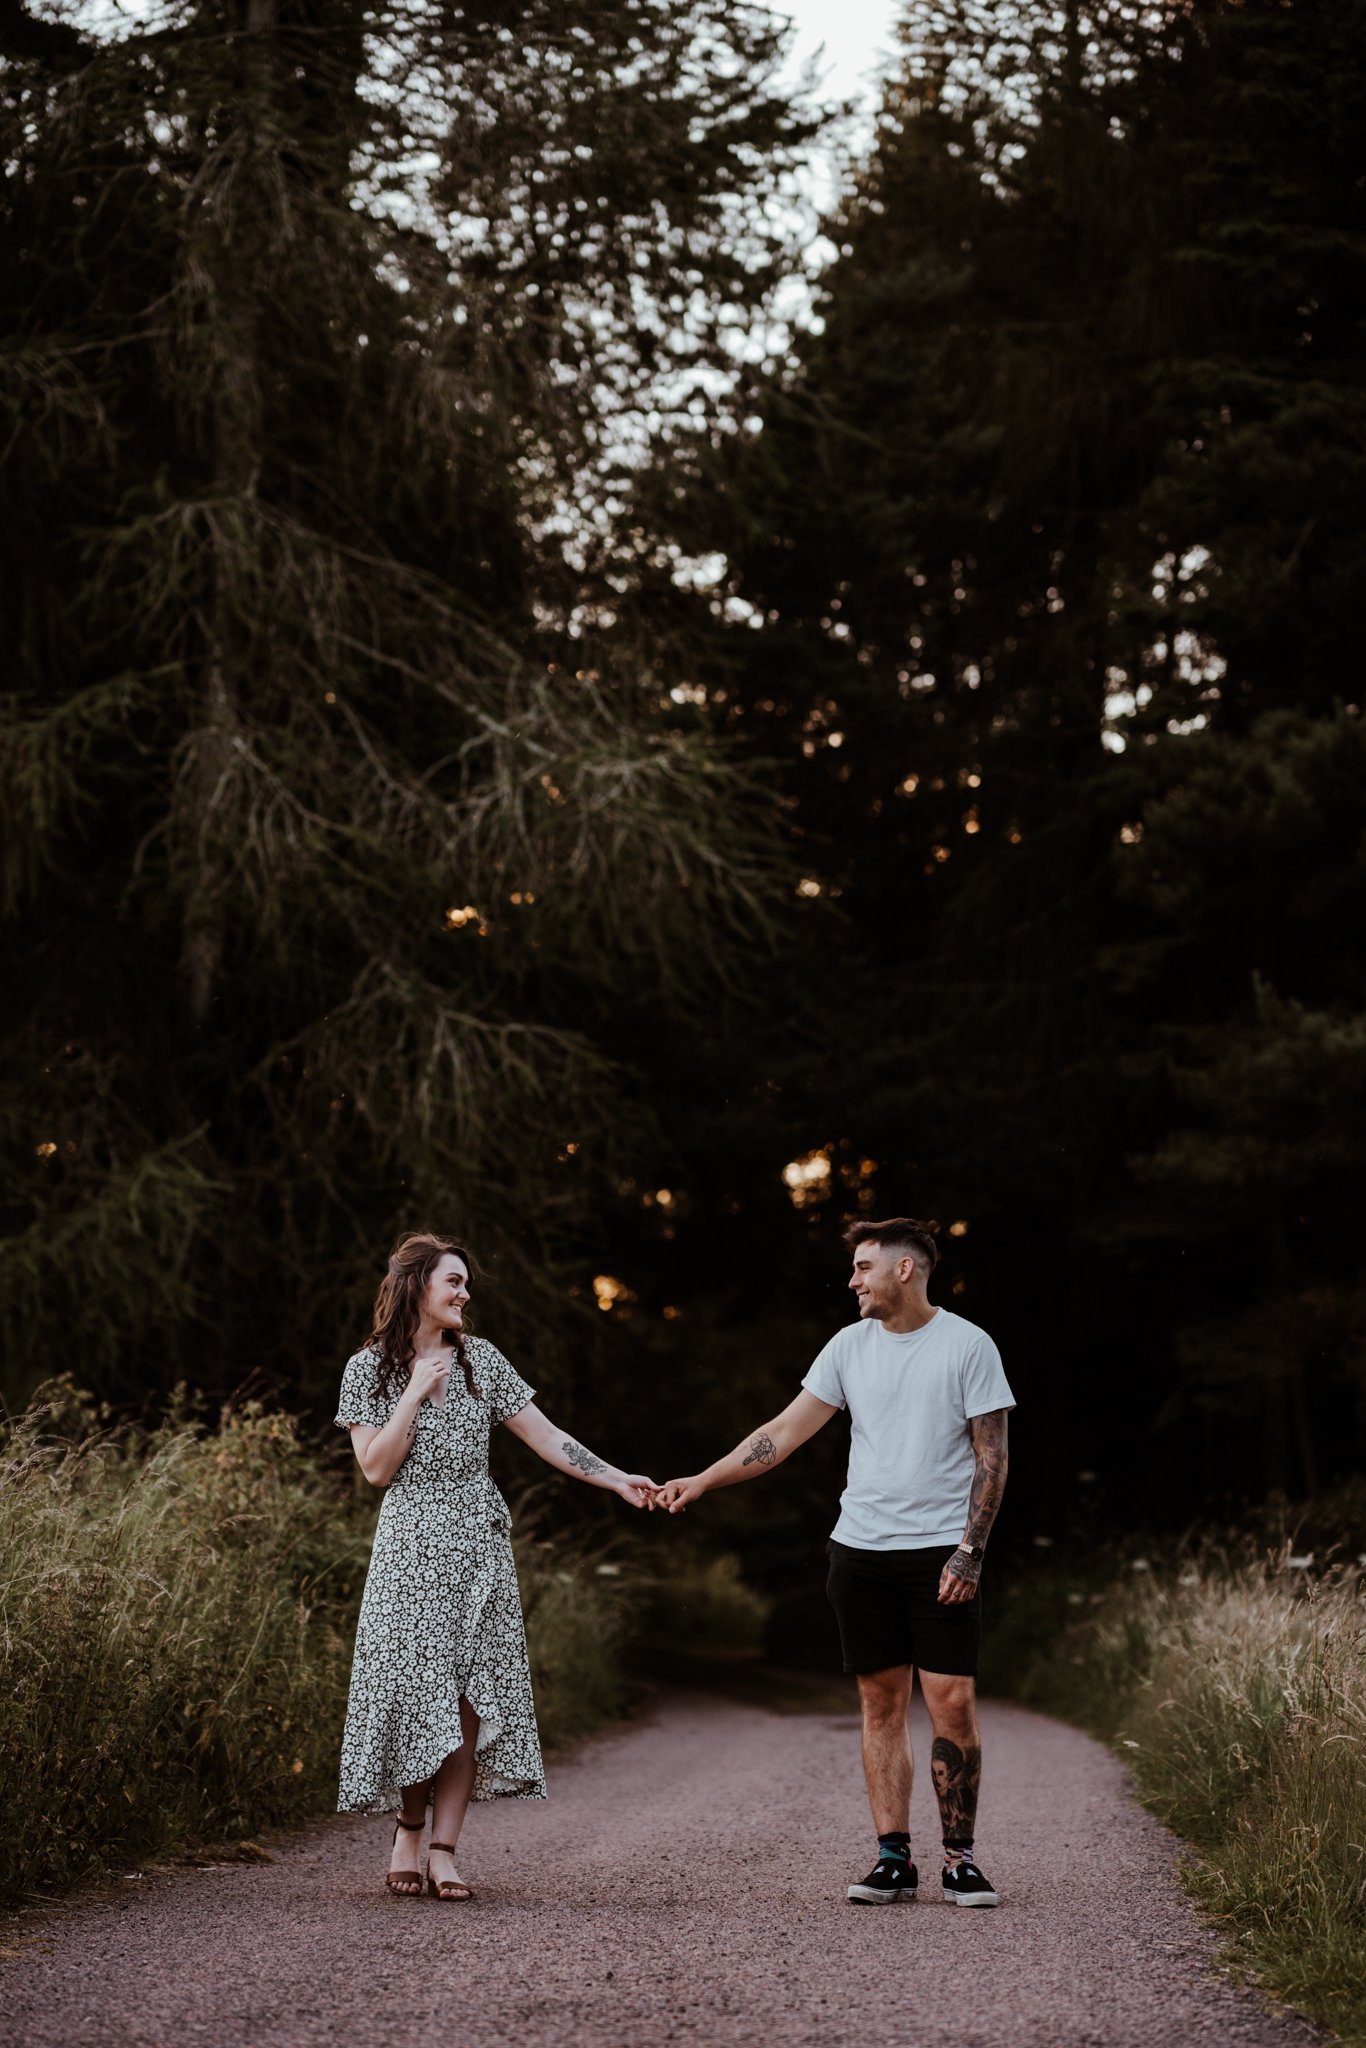 Angus Scotland Engagement and Wedding Photographer - Emily and Gabriel - Adventure Couple Session69.jpg